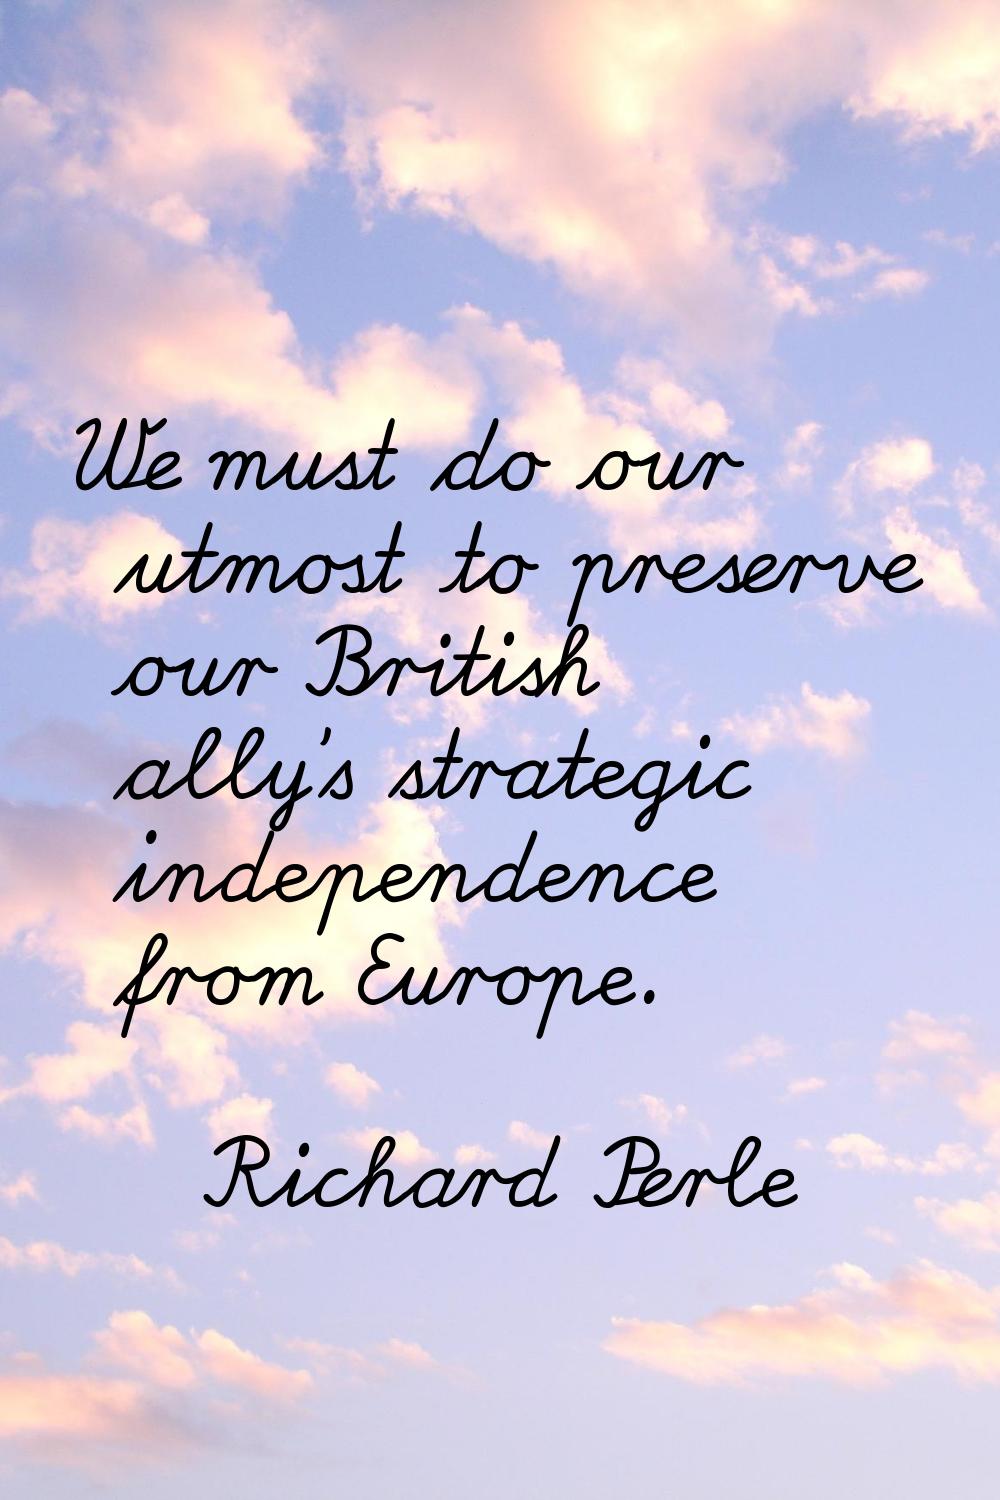 We must do our utmost to preserve our British ally's strategic independence from Europe.